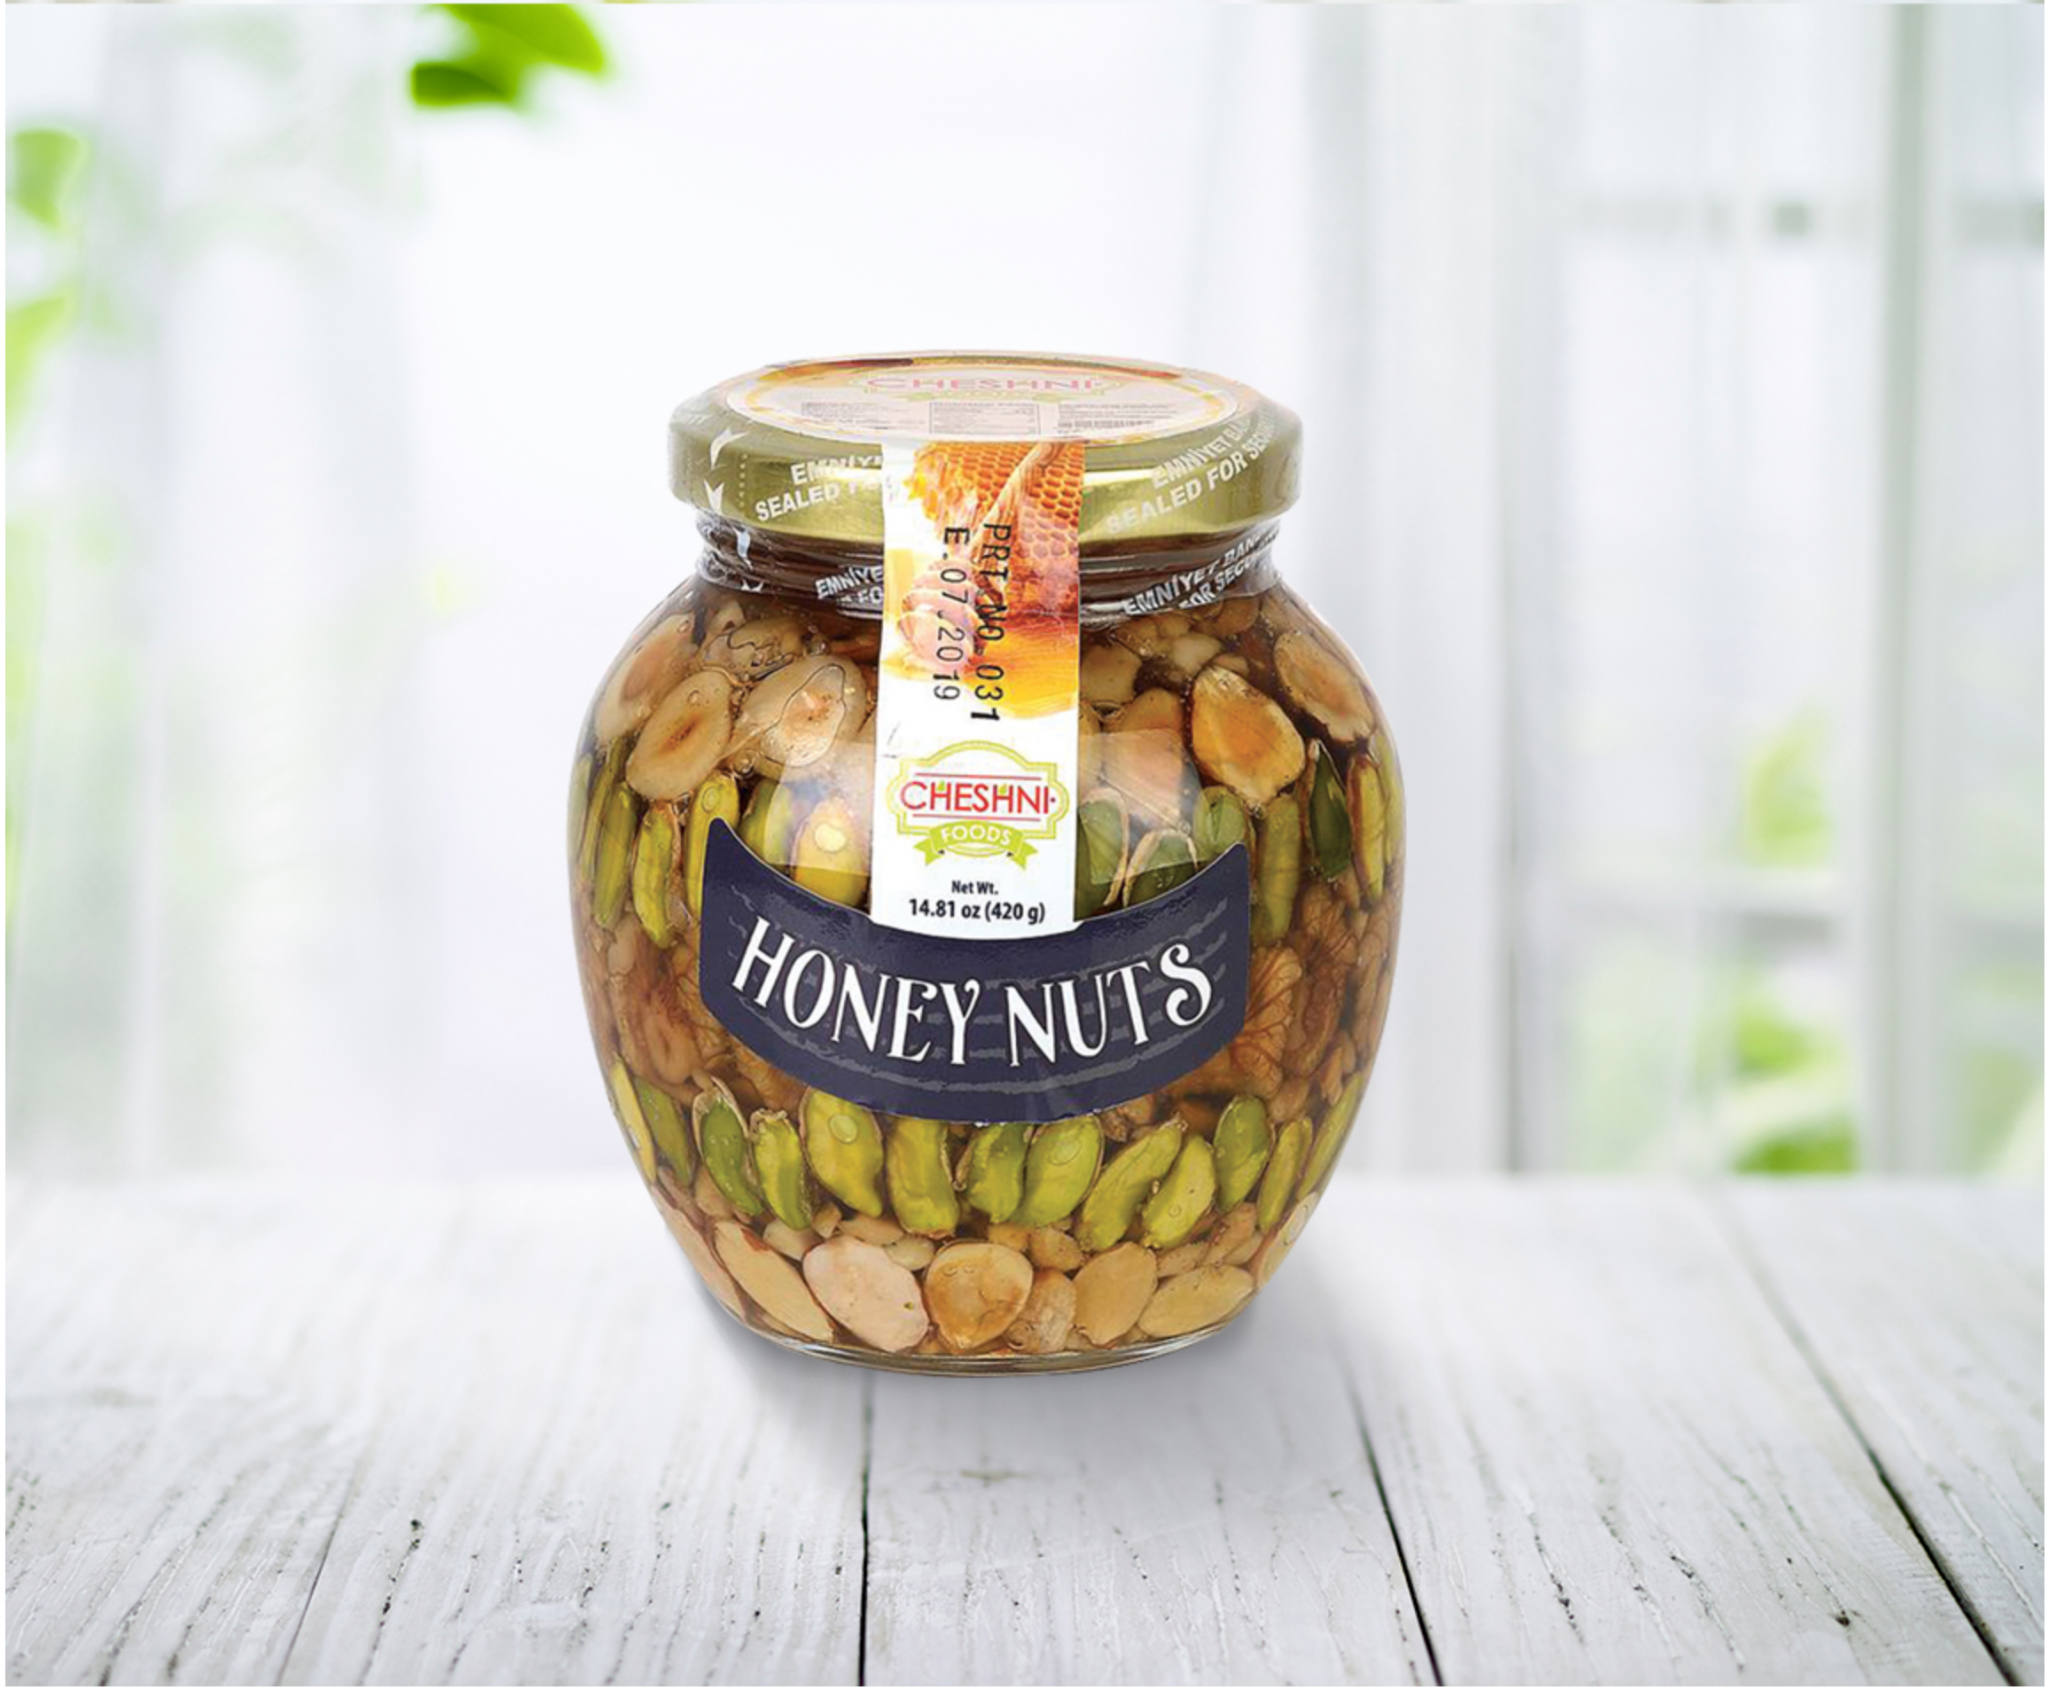 glass container of Honey Nuts in a setting on white boards and white windows